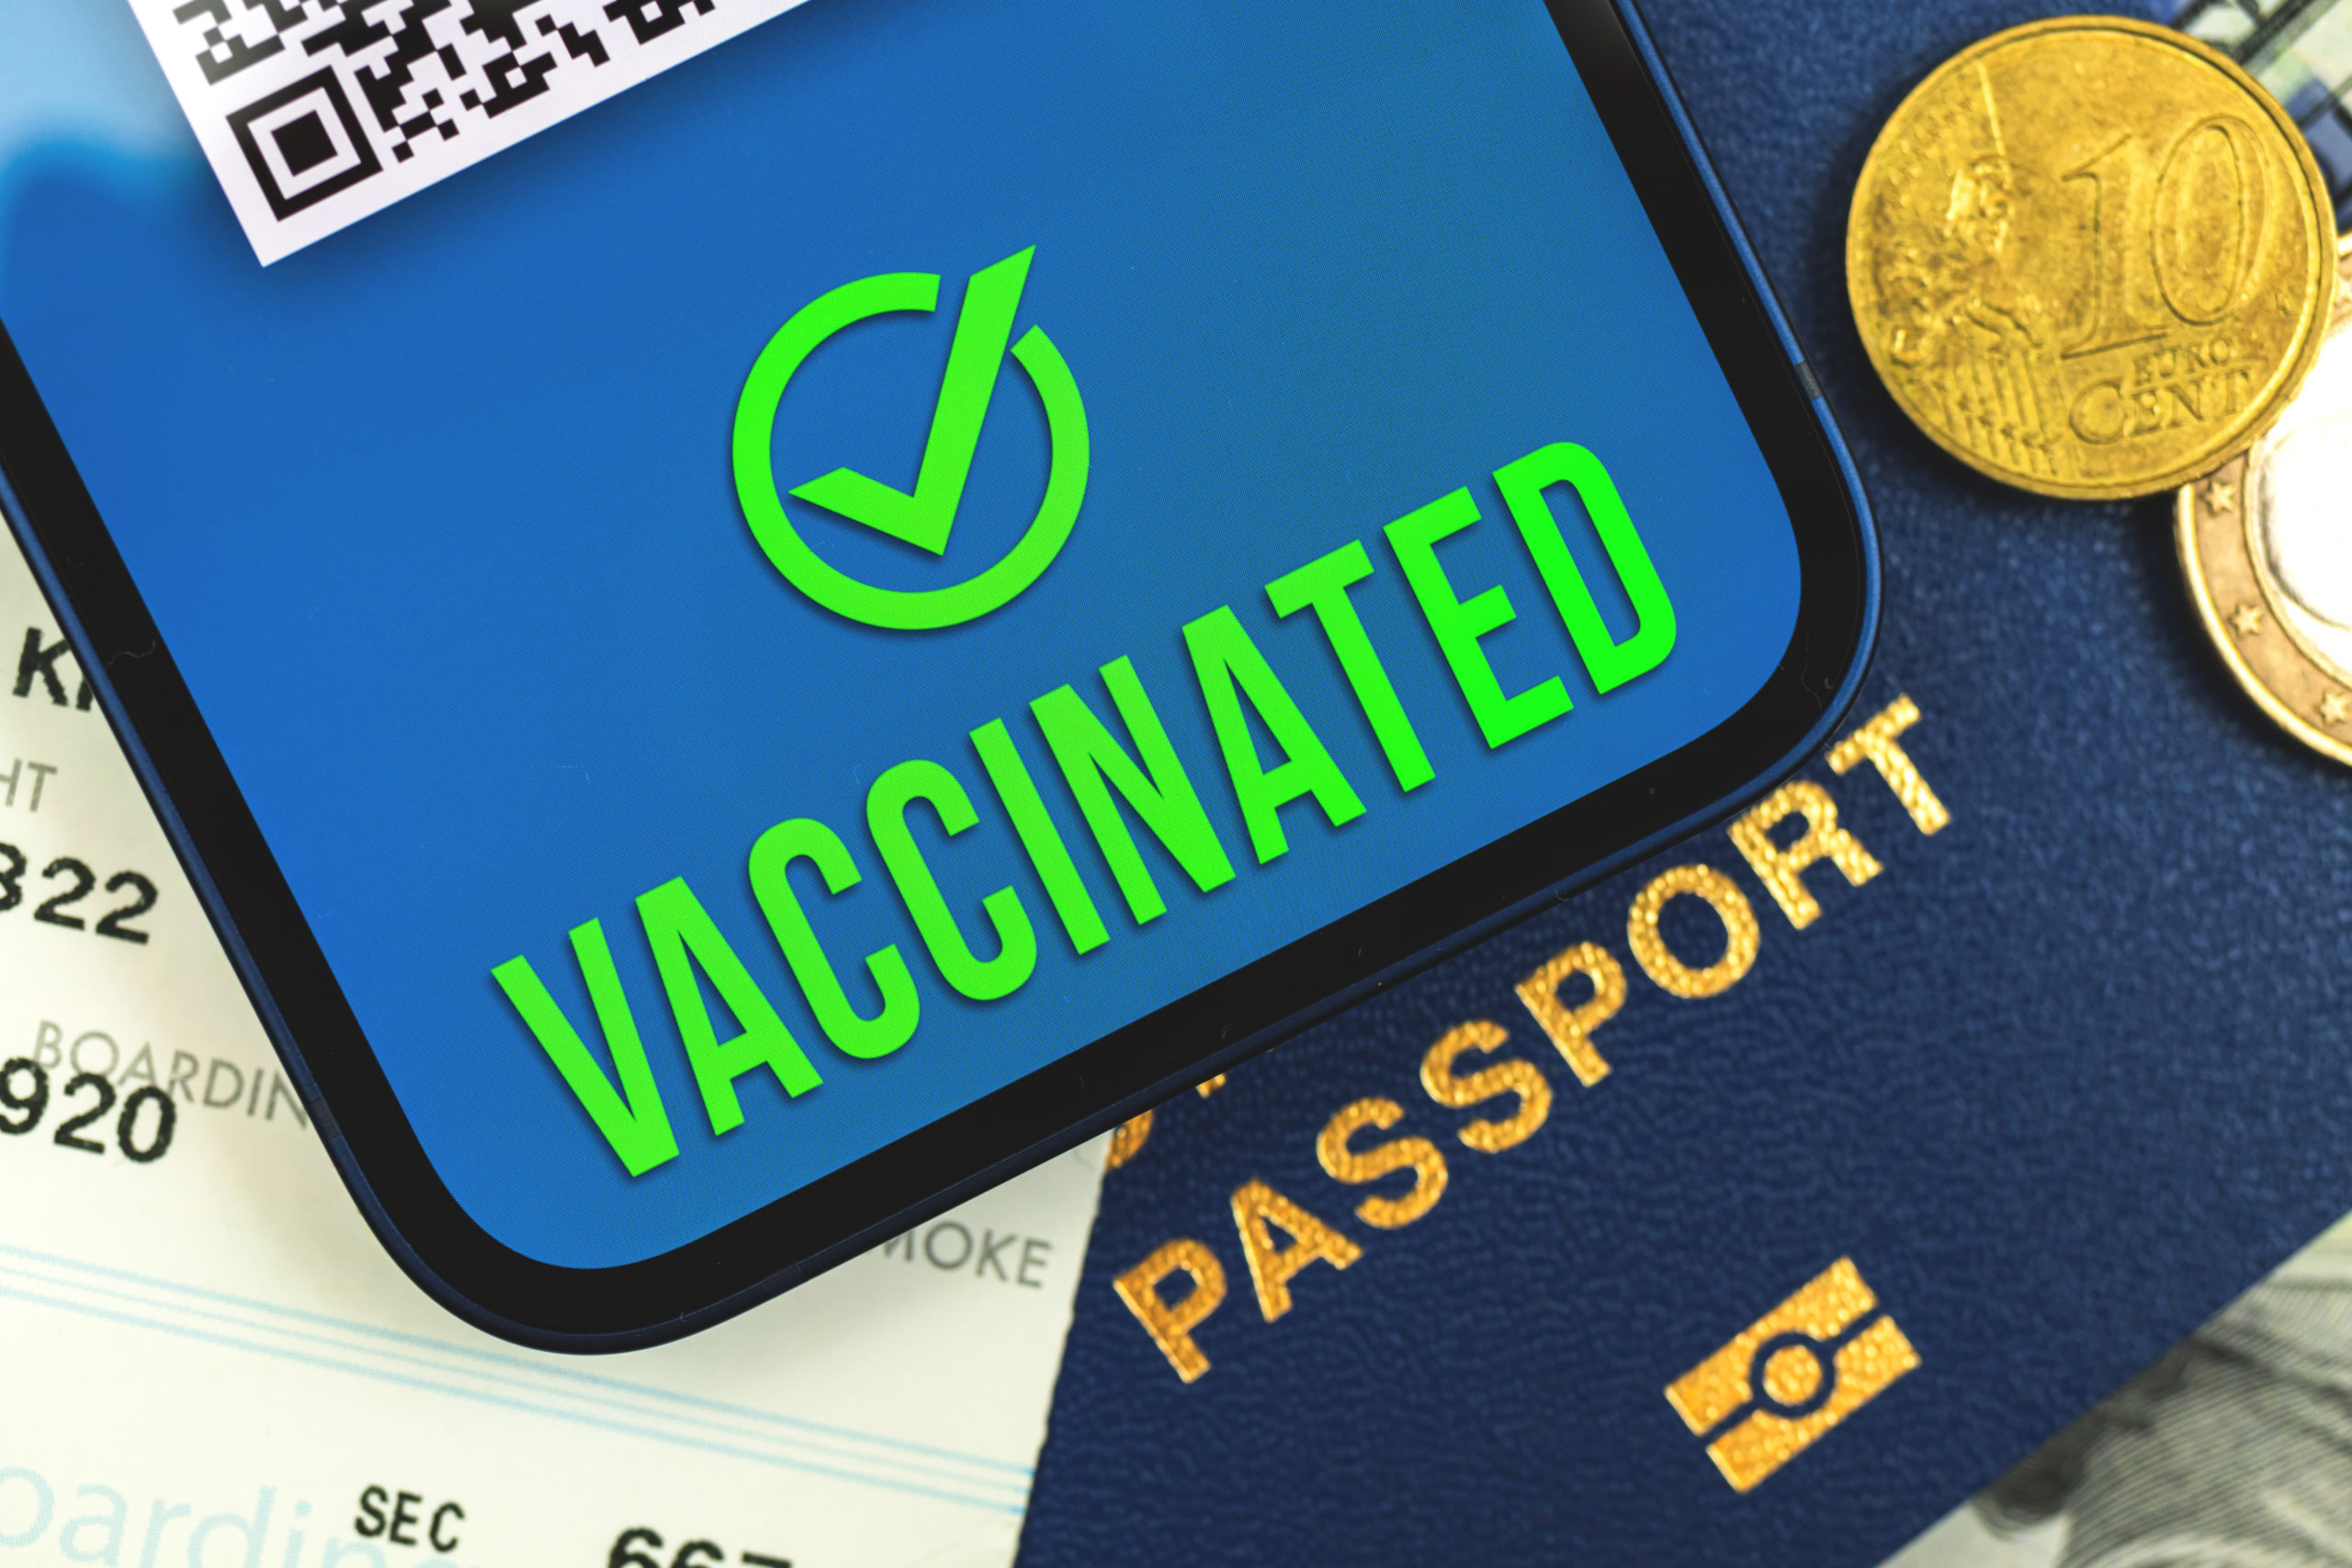 Canada to roll out vaccines passports for international travel